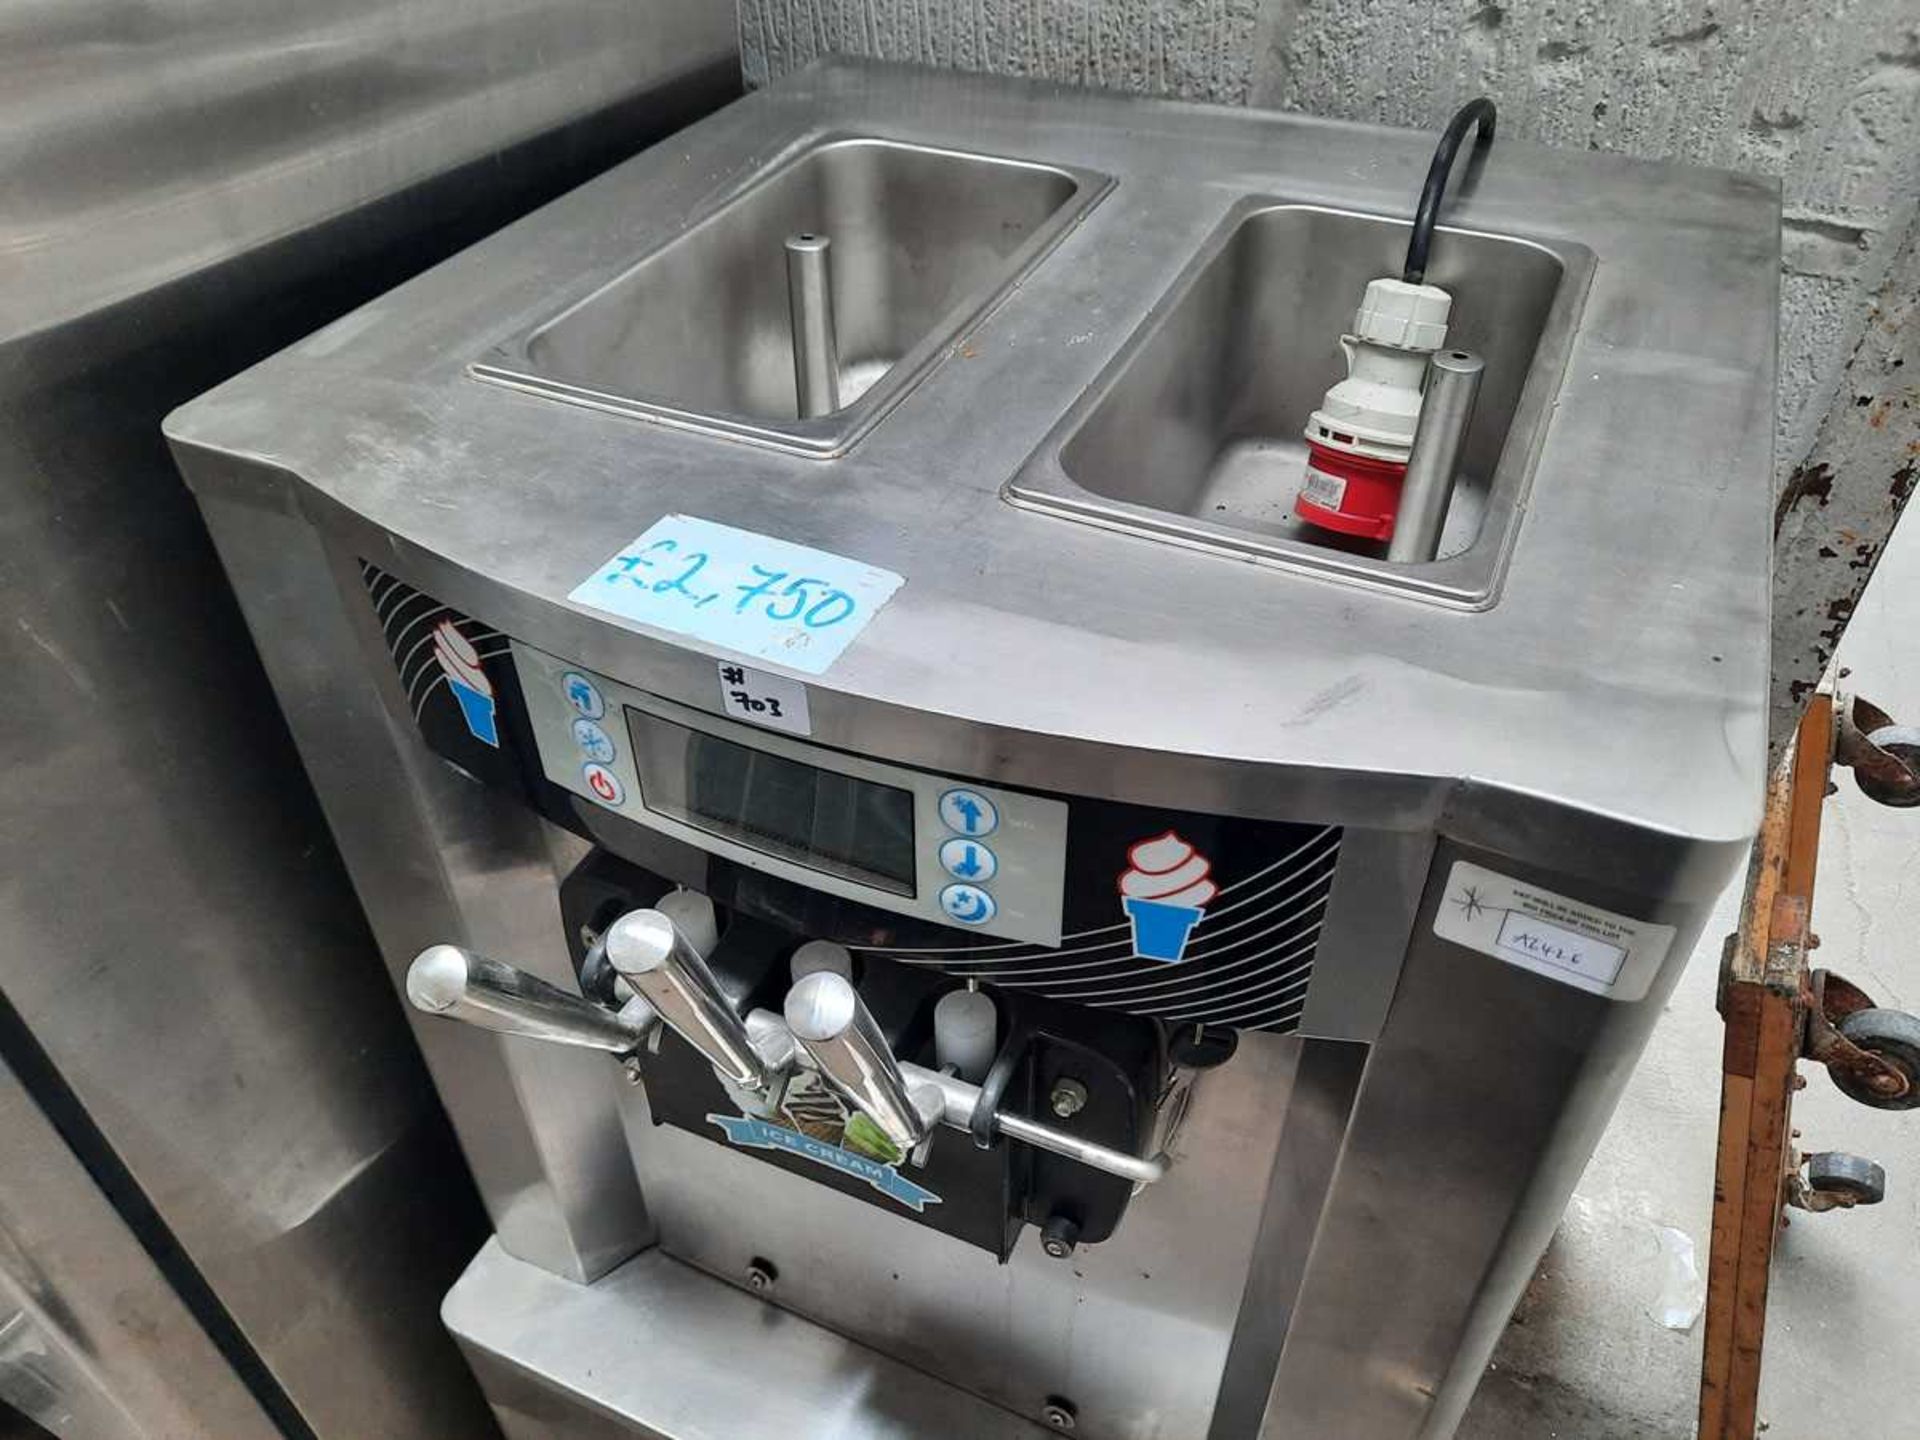 60cm ET638 soft serve ice cream machine with 3 dispensers and 2 hoppers - Image 2 of 2